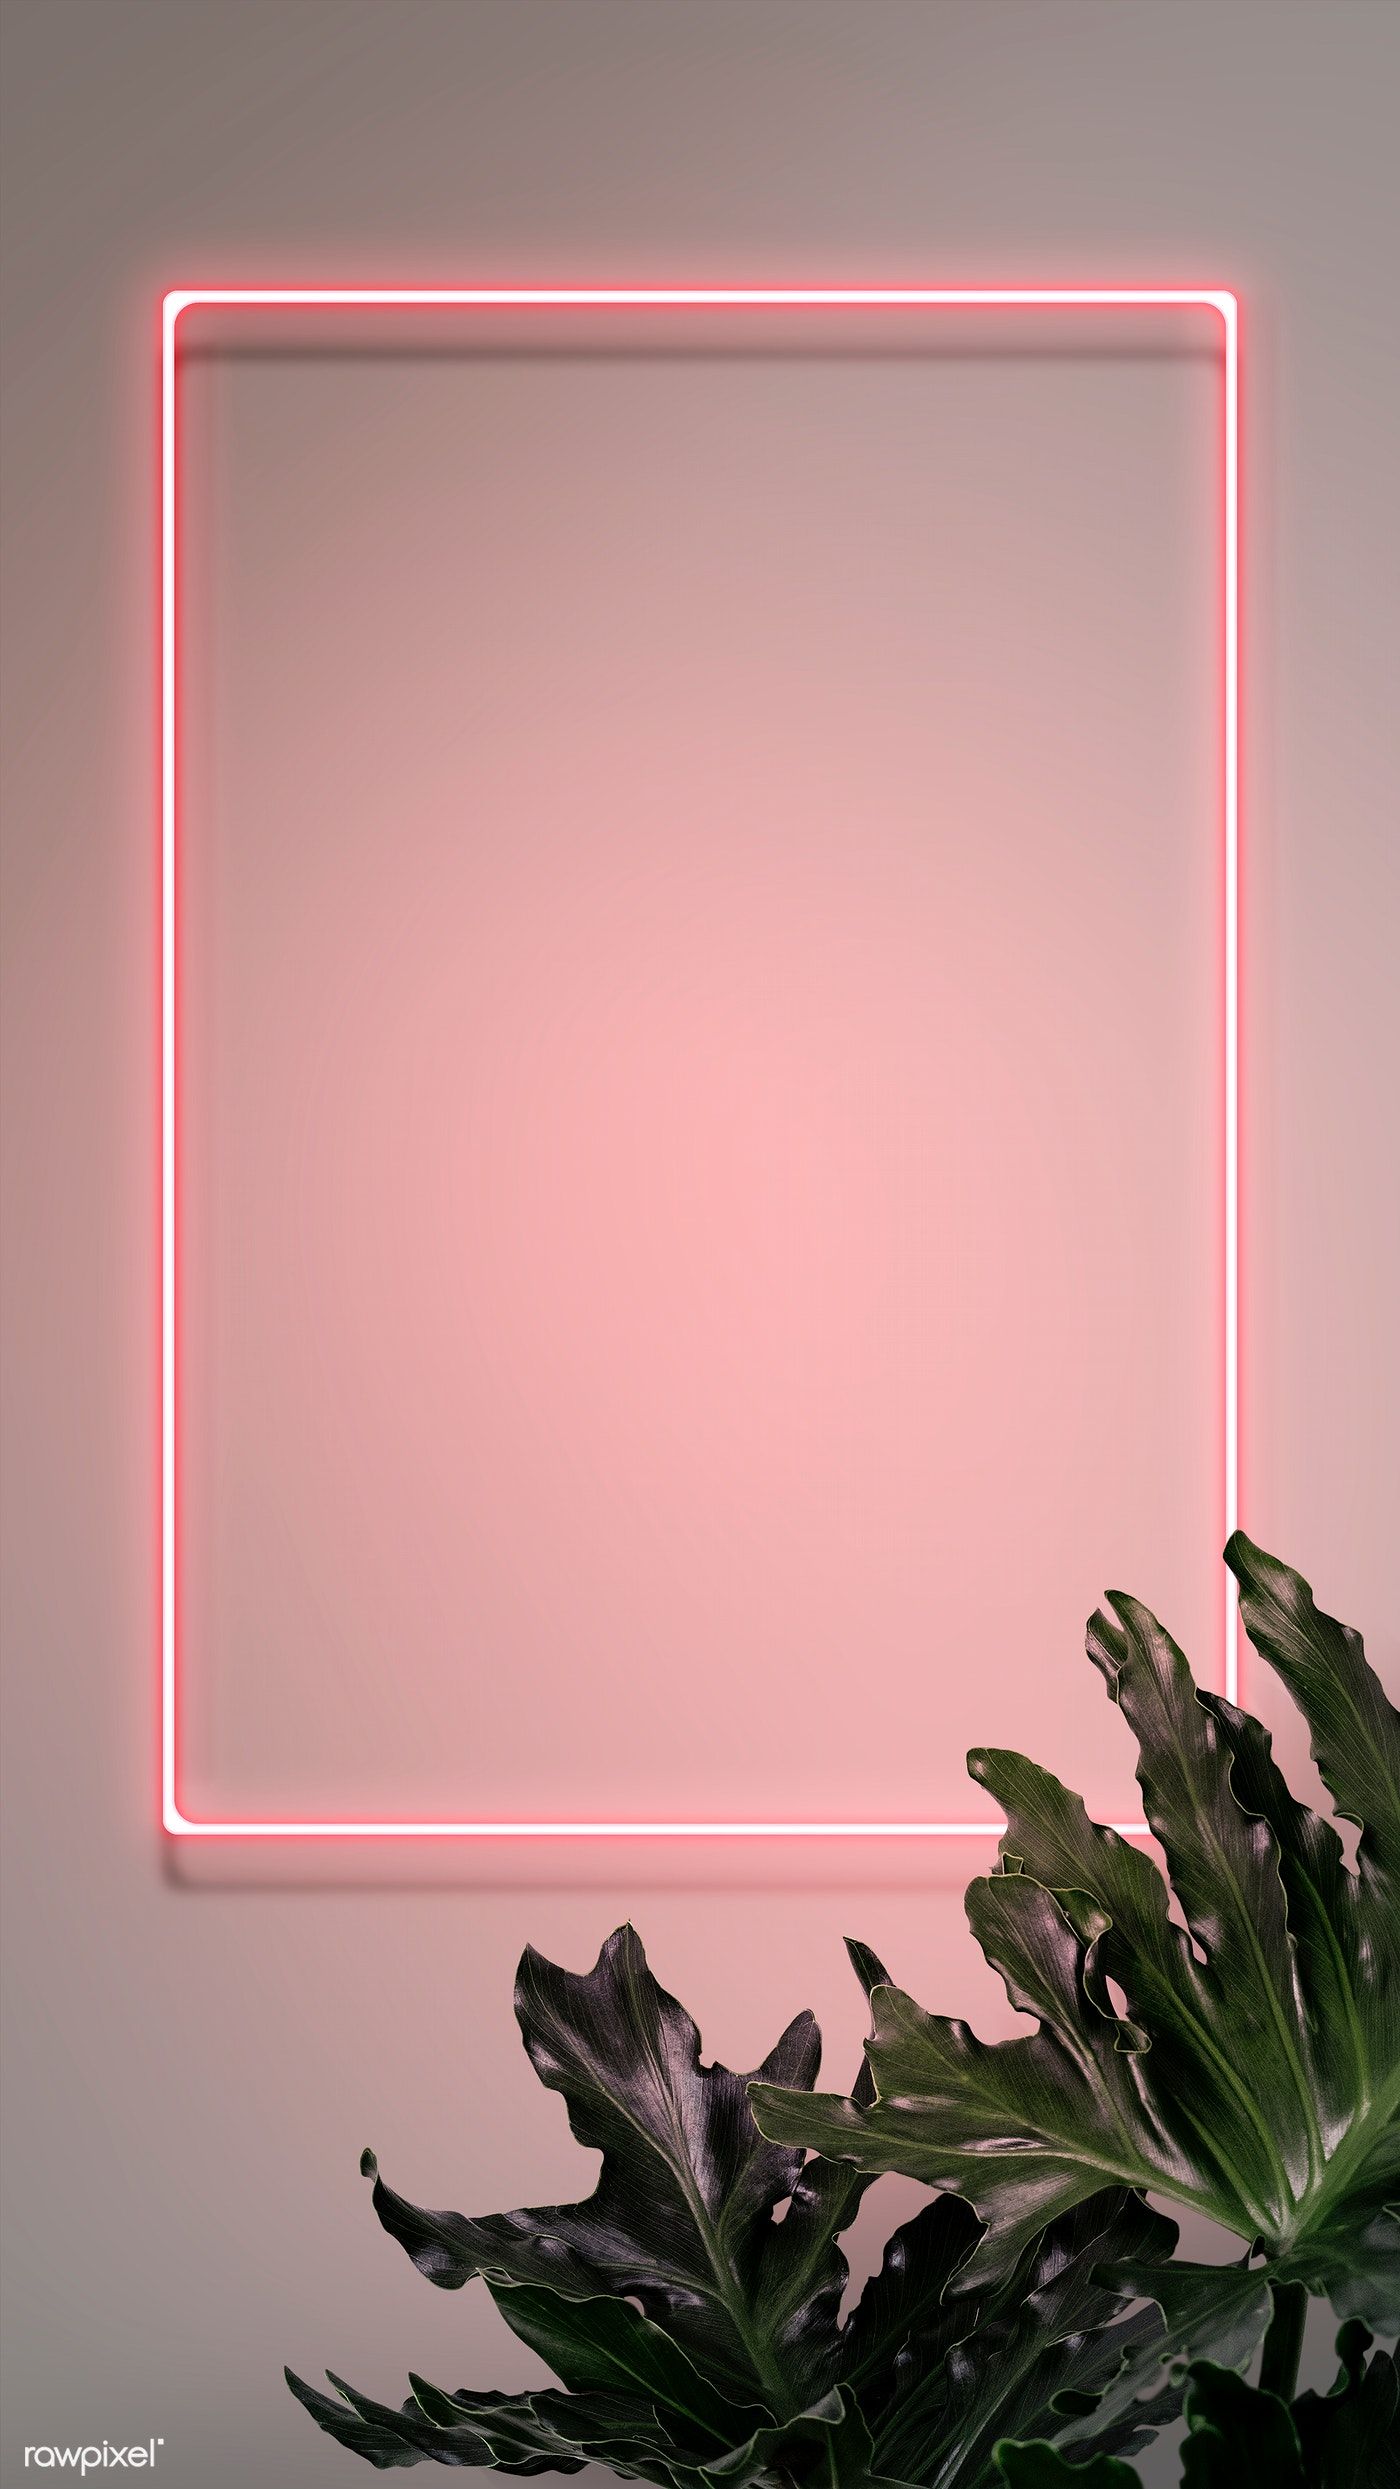 Download premium psd of Neon red hello with a flamingo in a frame 894333. Framed wallpaper, Instagram wallpaper, Pink wallpaper